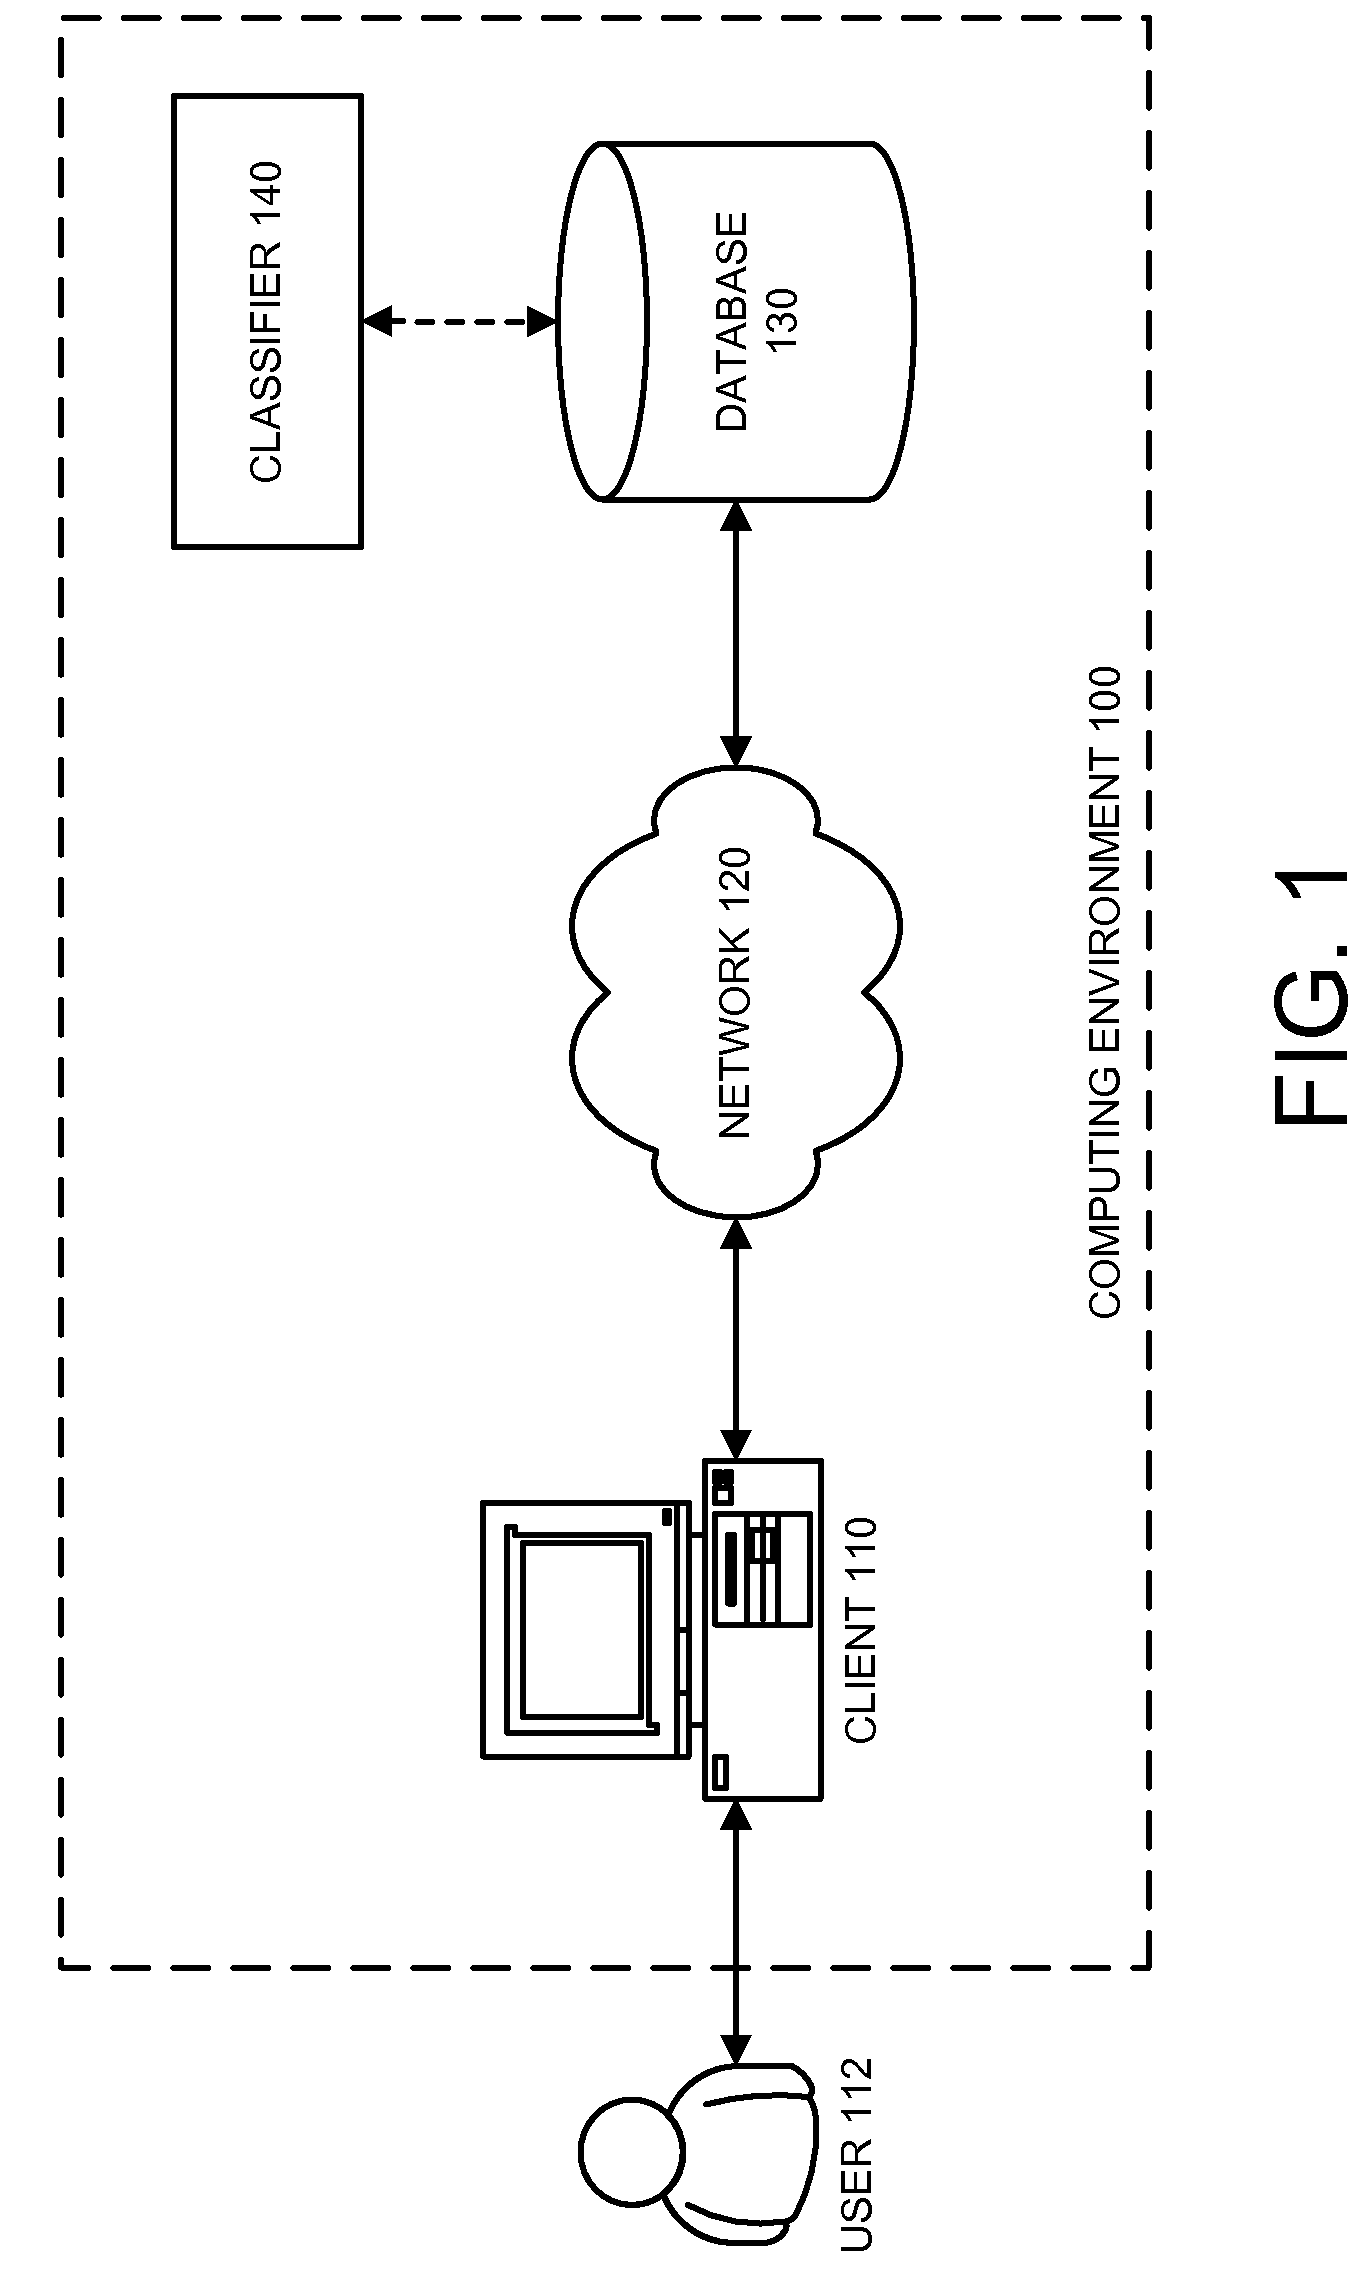 Method and apparatus for automatically classifying data